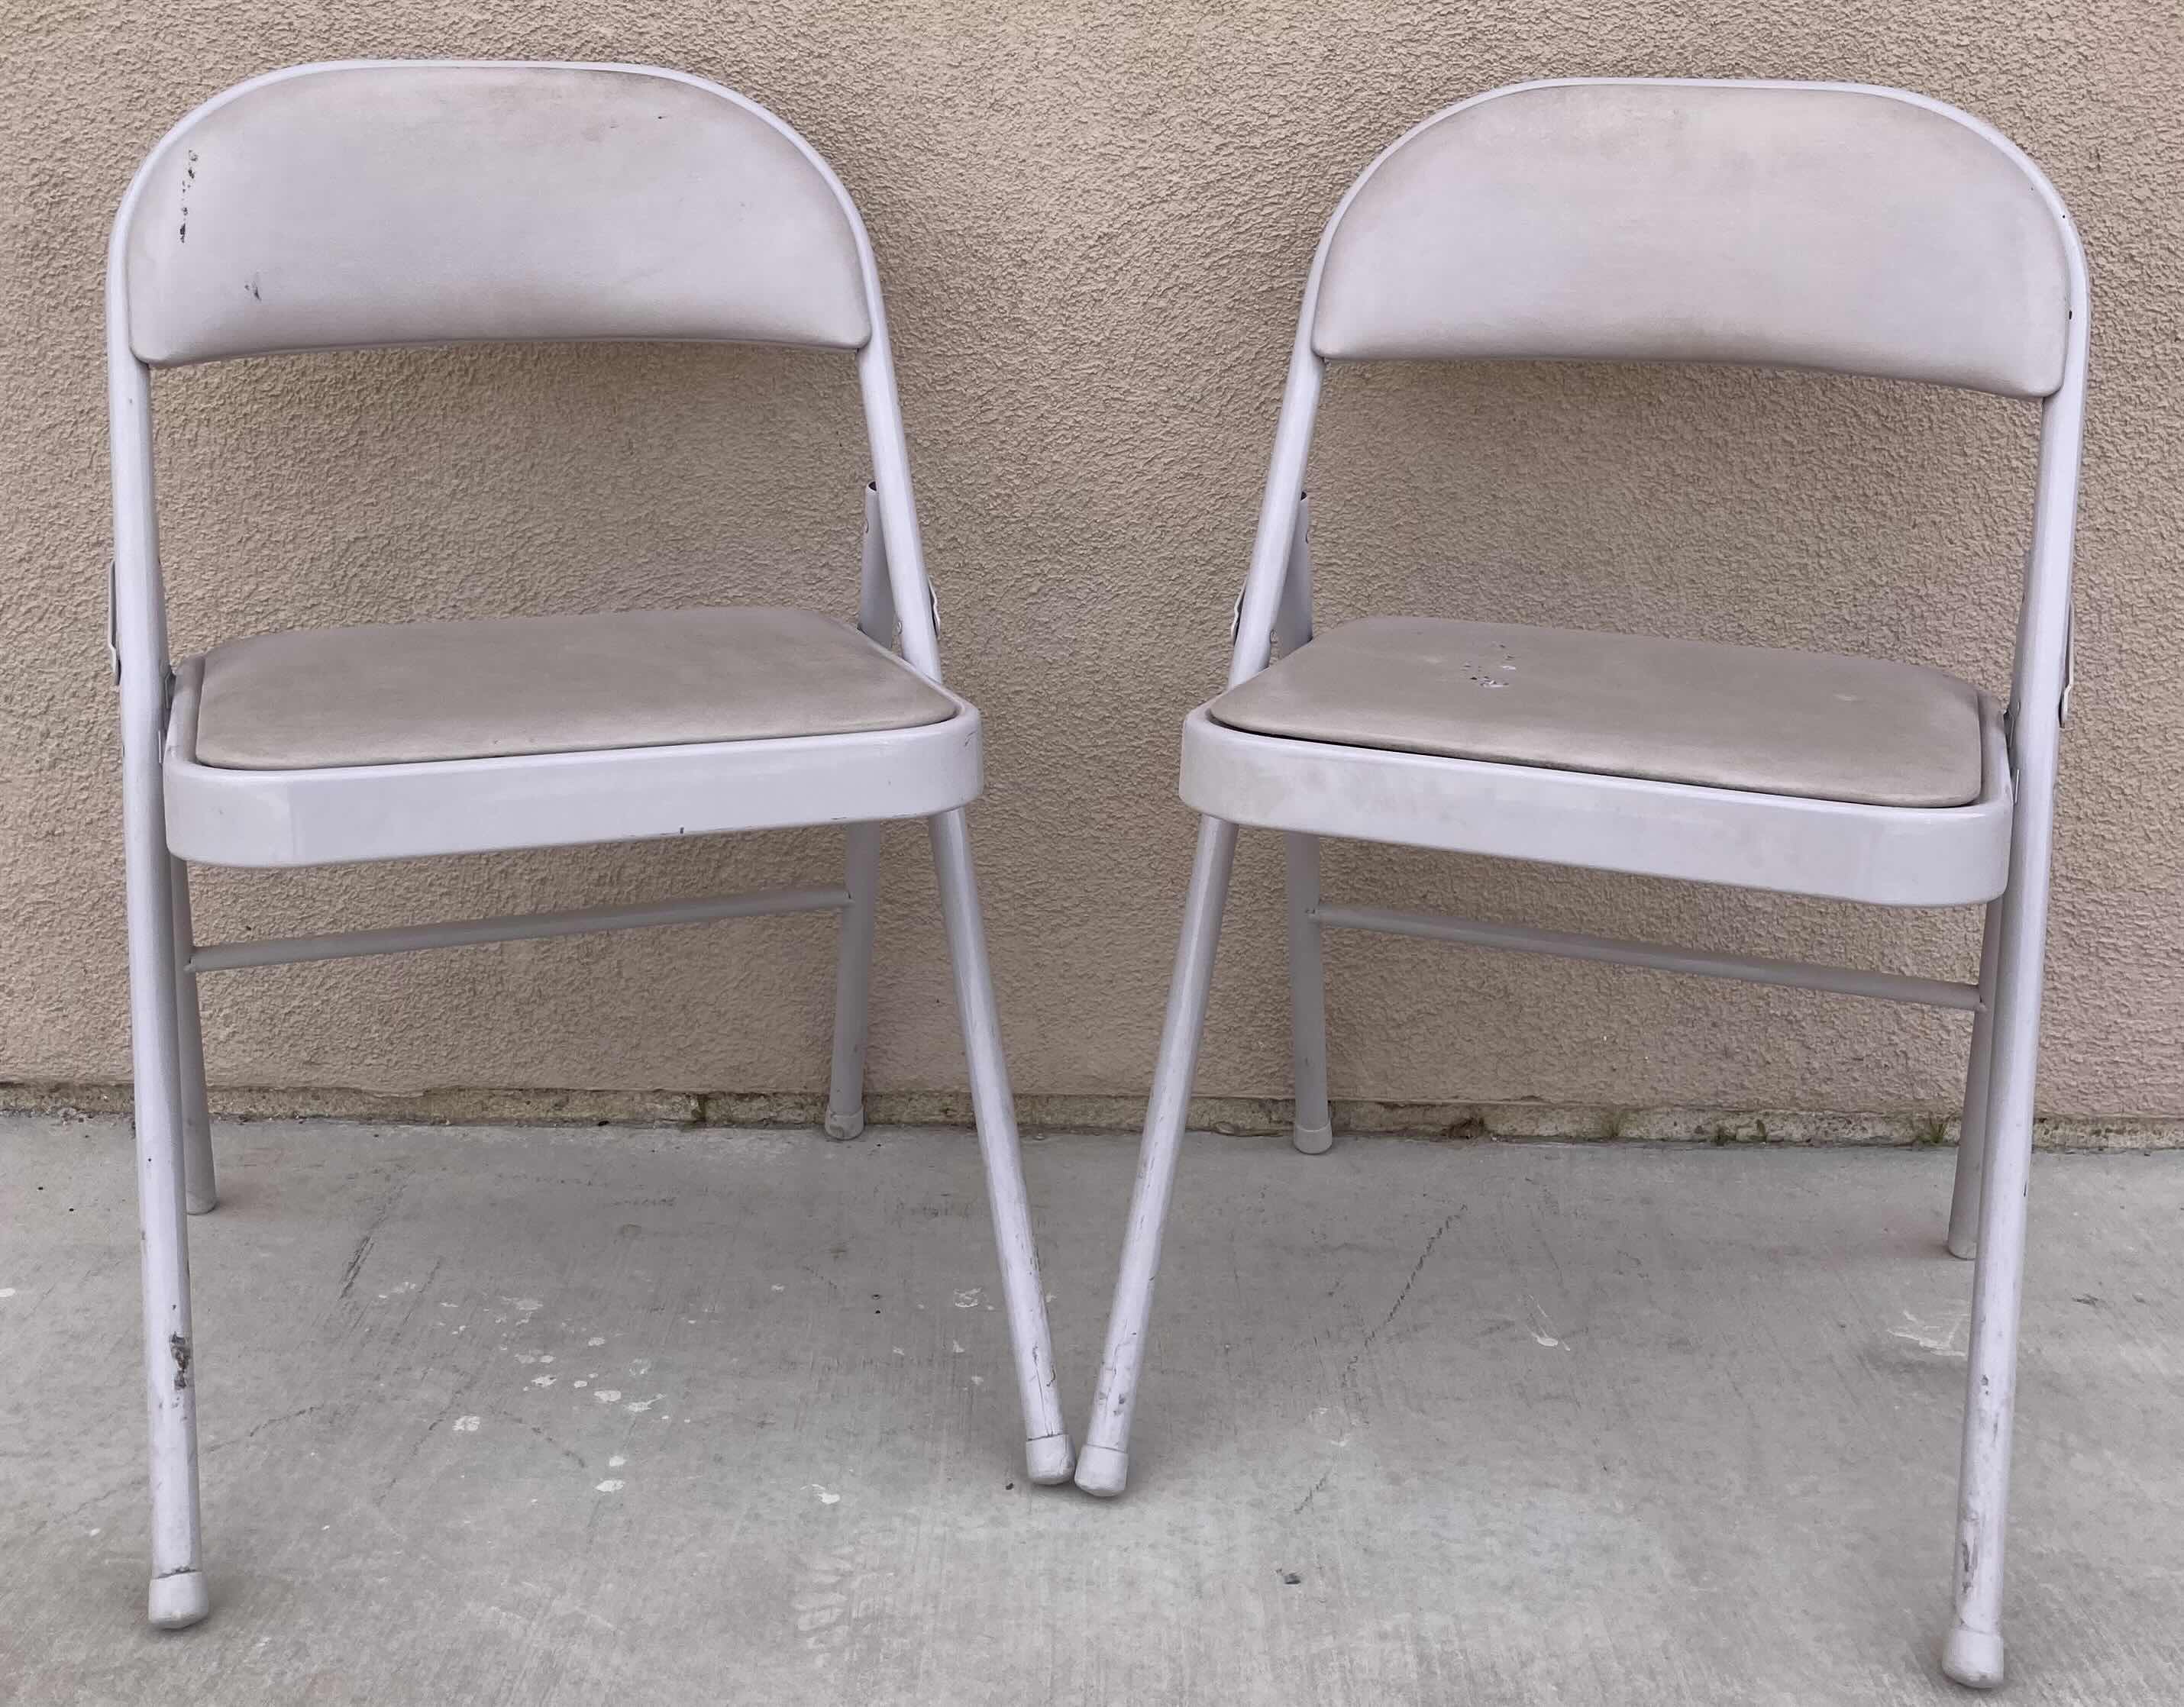 Photo 1 of MECO PADDED FOLDING METAL CHAIRS (2) 18.5” X 19.5” H29”